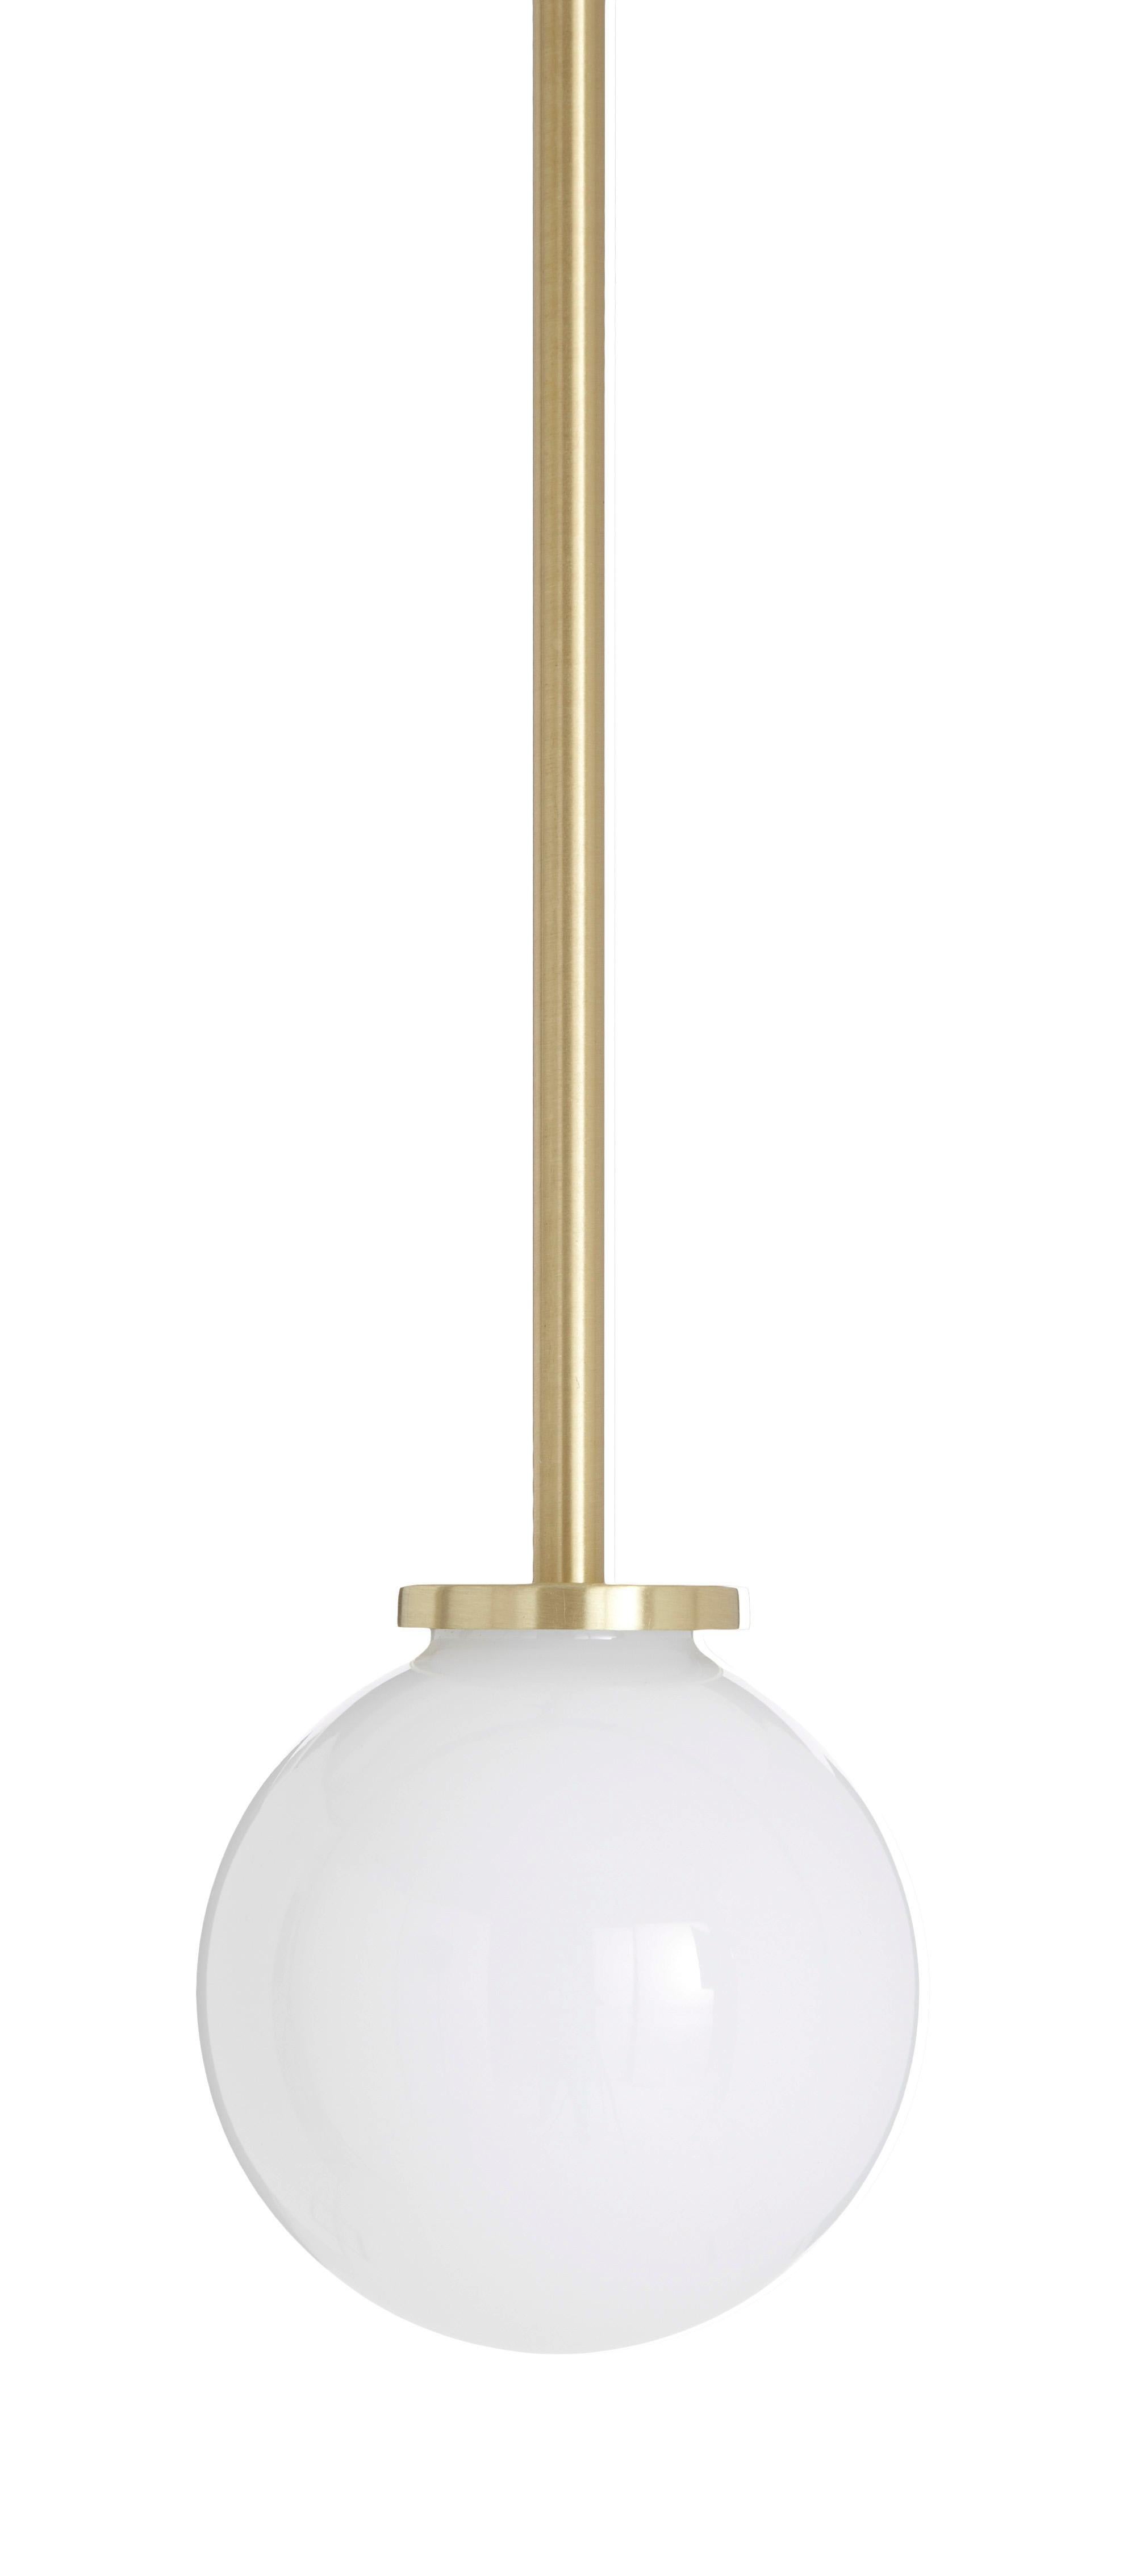 Mezzo pendant by CTO Lighting
Materials: satin brass with opal glass shade and satin brass drop rod
Dimensions: H 15 x W 12 cm

All our lamps can be wired according to each country. If sold to the USA it will be wired for the USA for instance.
Other